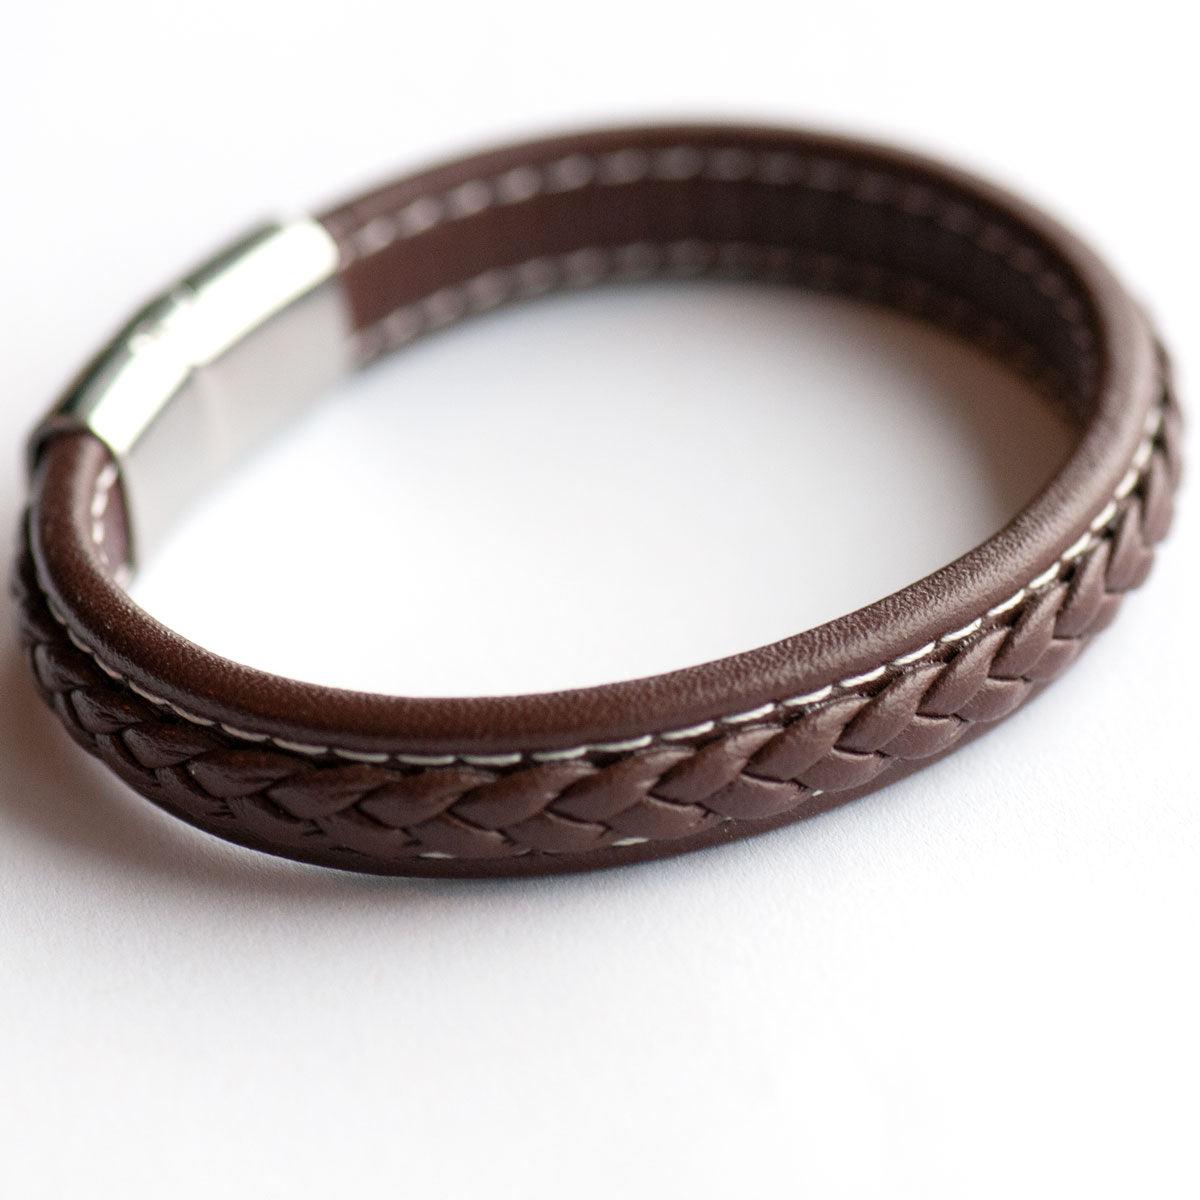 Unisex Braided Leather Bracelets with Stainless Steel Magnetic Clasp - Fierce Lynx Designs